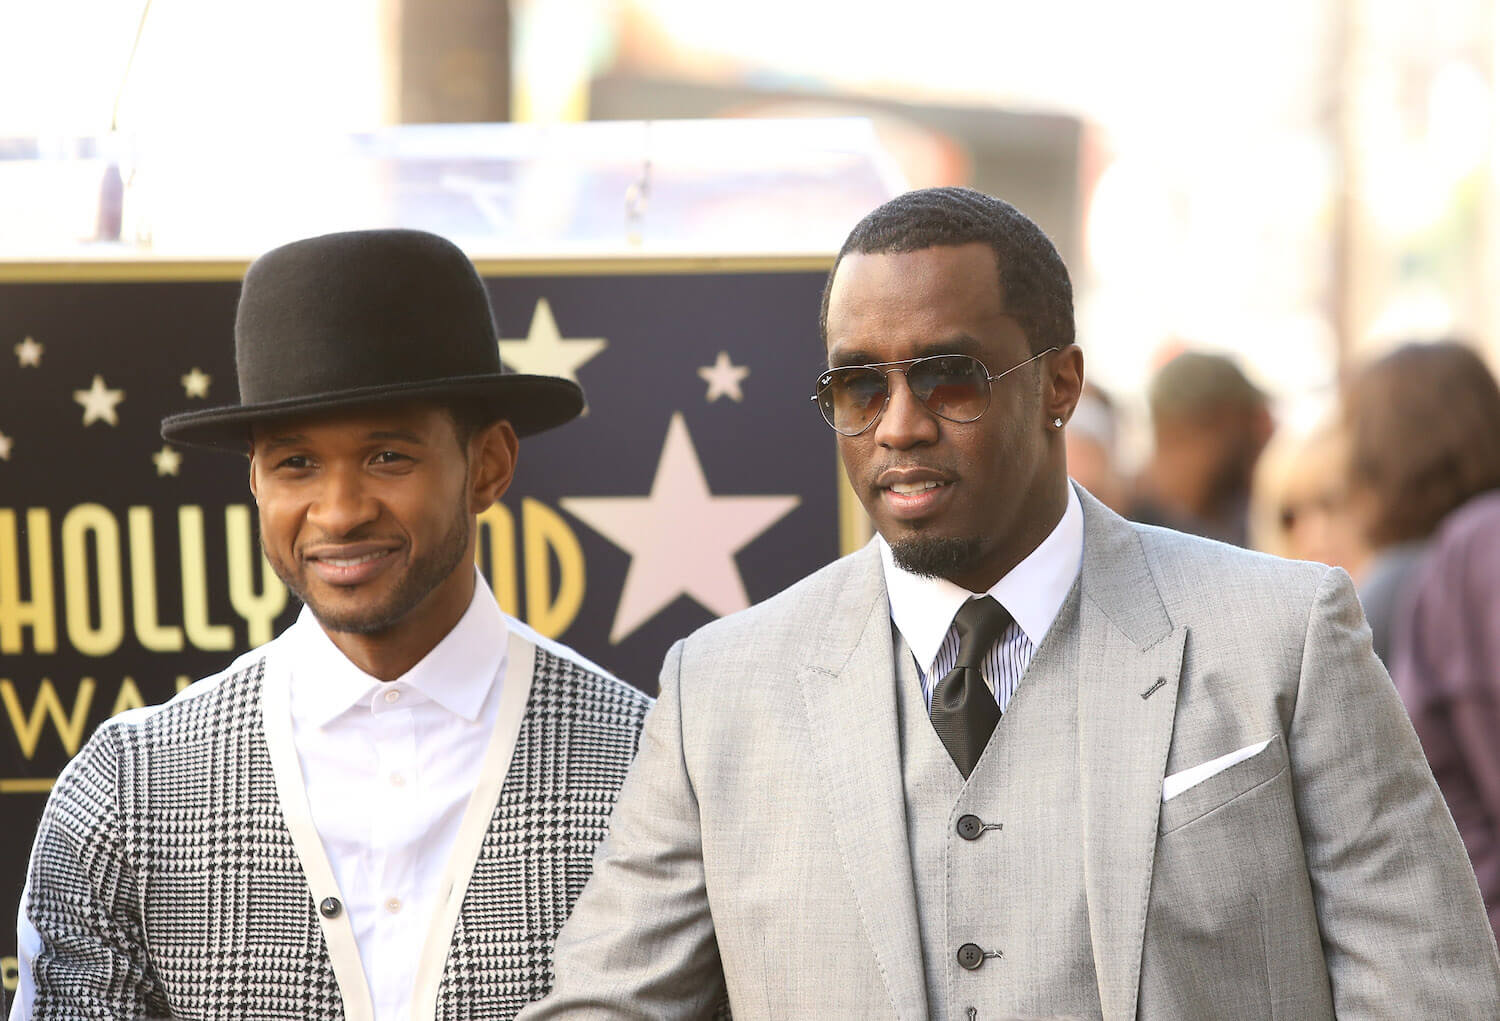 Usher and Sean 'P. Diddy' Combs dressed in suits at an event together